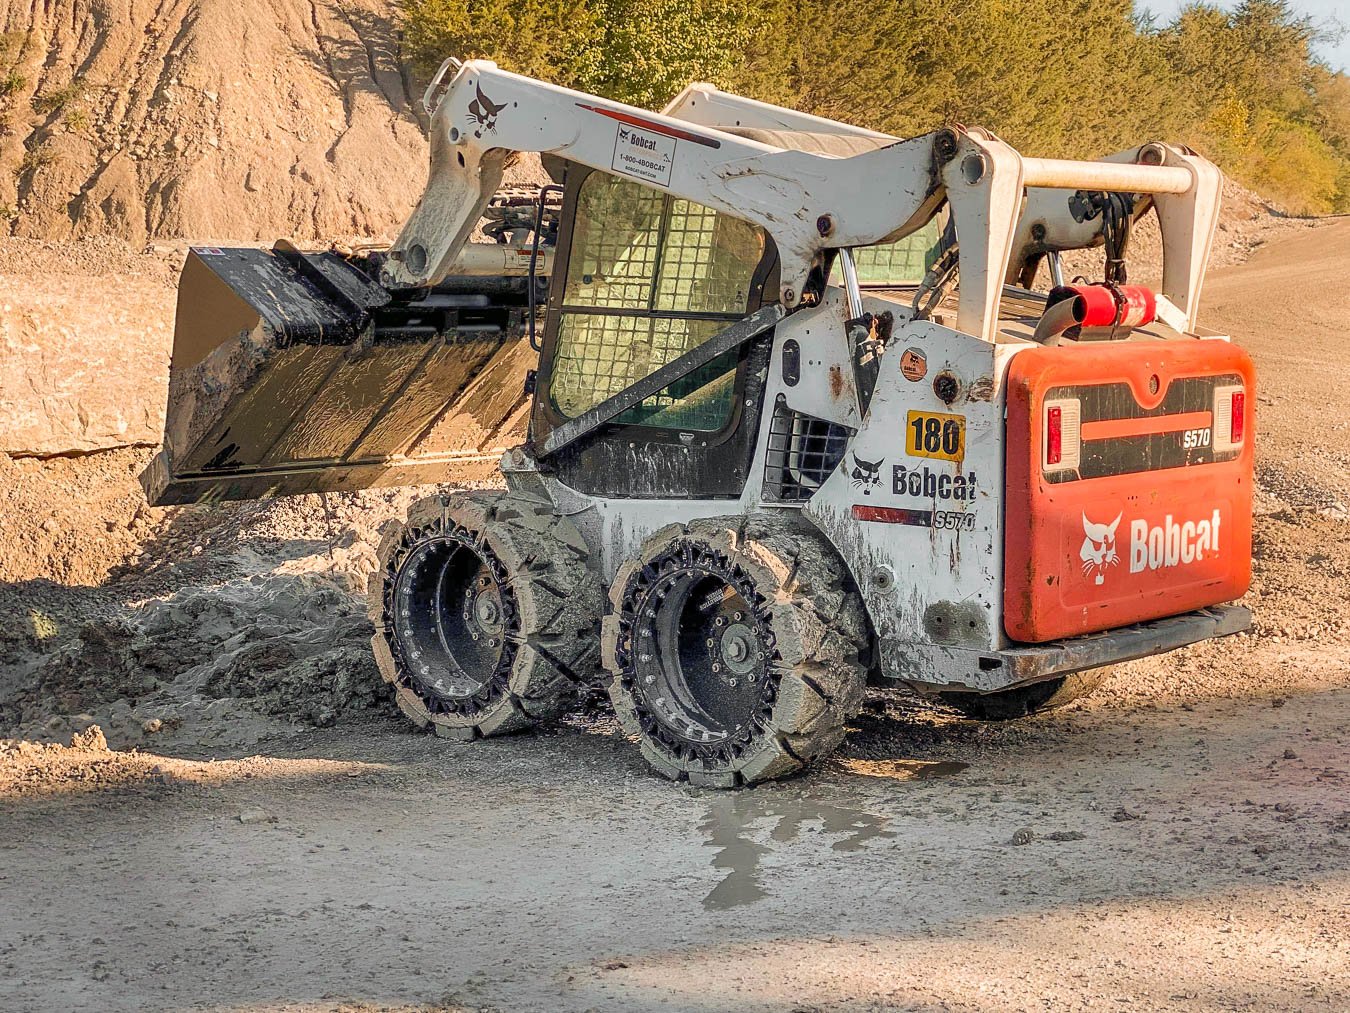 This image shows a BOBCAT S570 with our solid skid steer tires the EWRS-HS